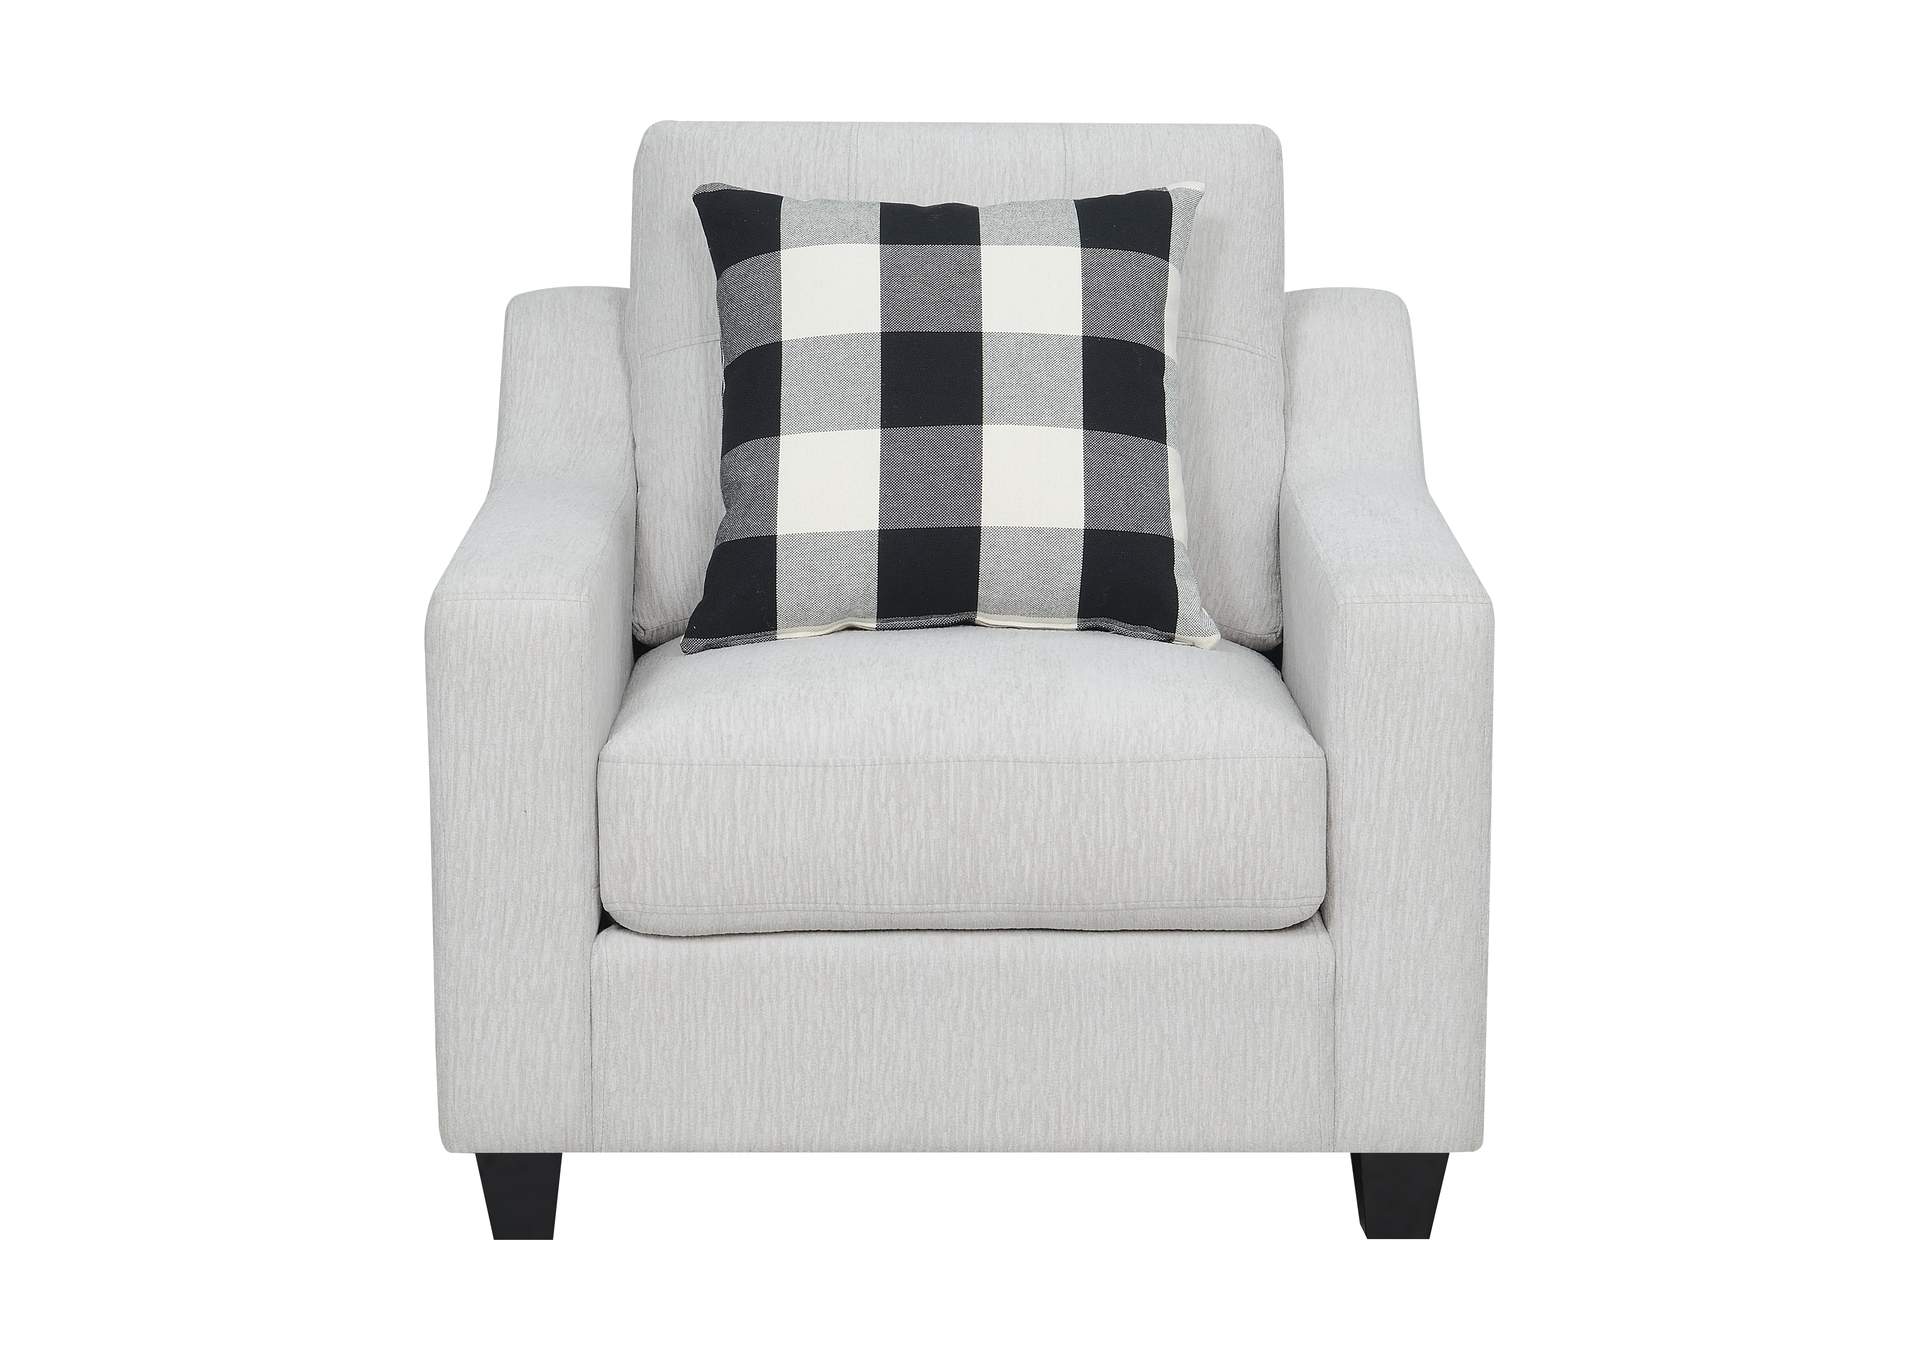 Darcey Accent Chair,Emerald Home Furnishings